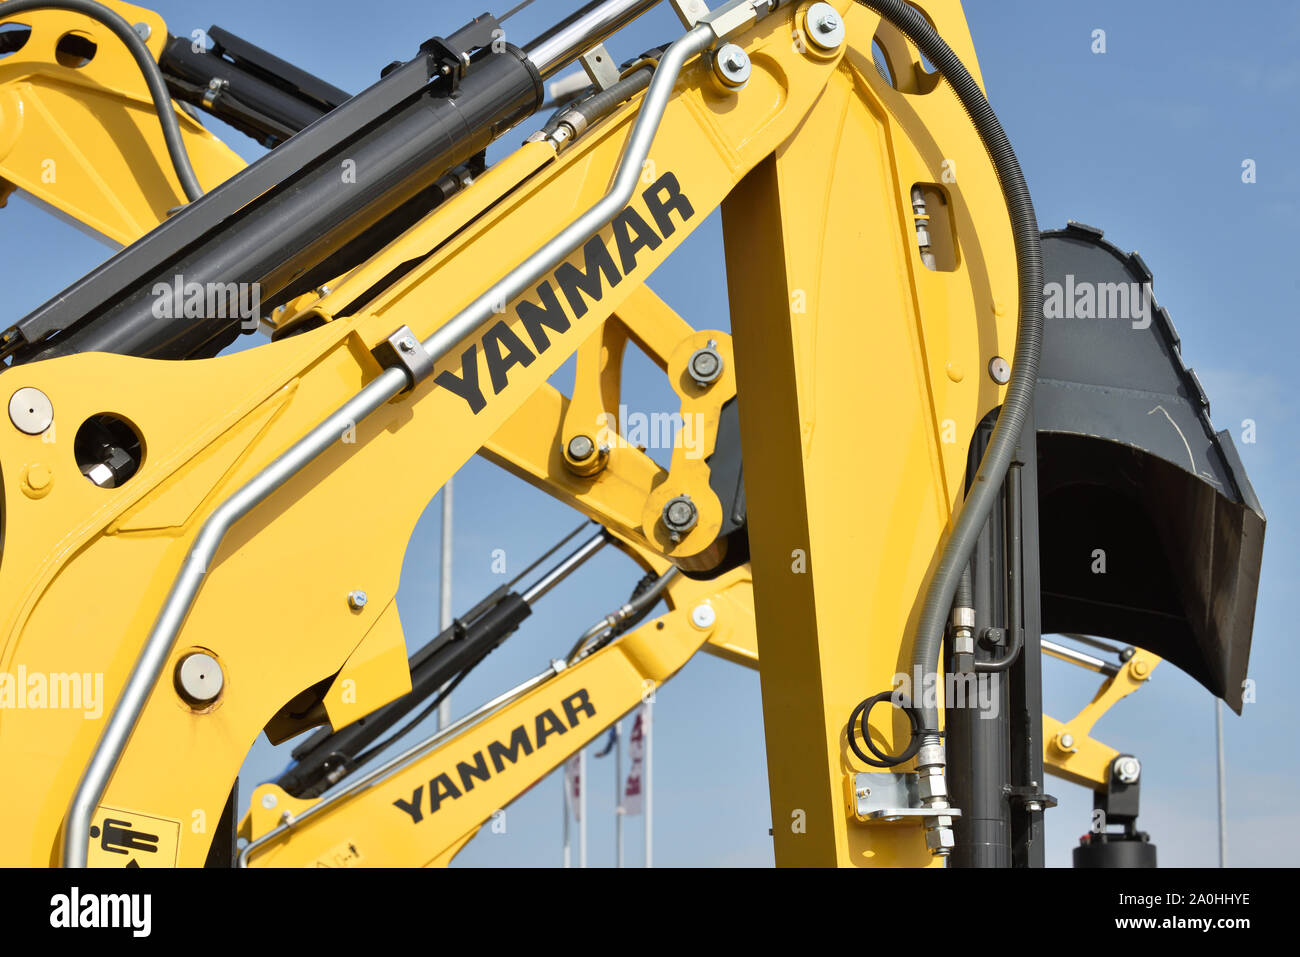 Vilnius, Lithuania - April 25: Yanmar excavator and logo on April 25, 2019 in Vilnius Lithuania. Yanmar is a Japanese company involved in the manufact Stock Photo